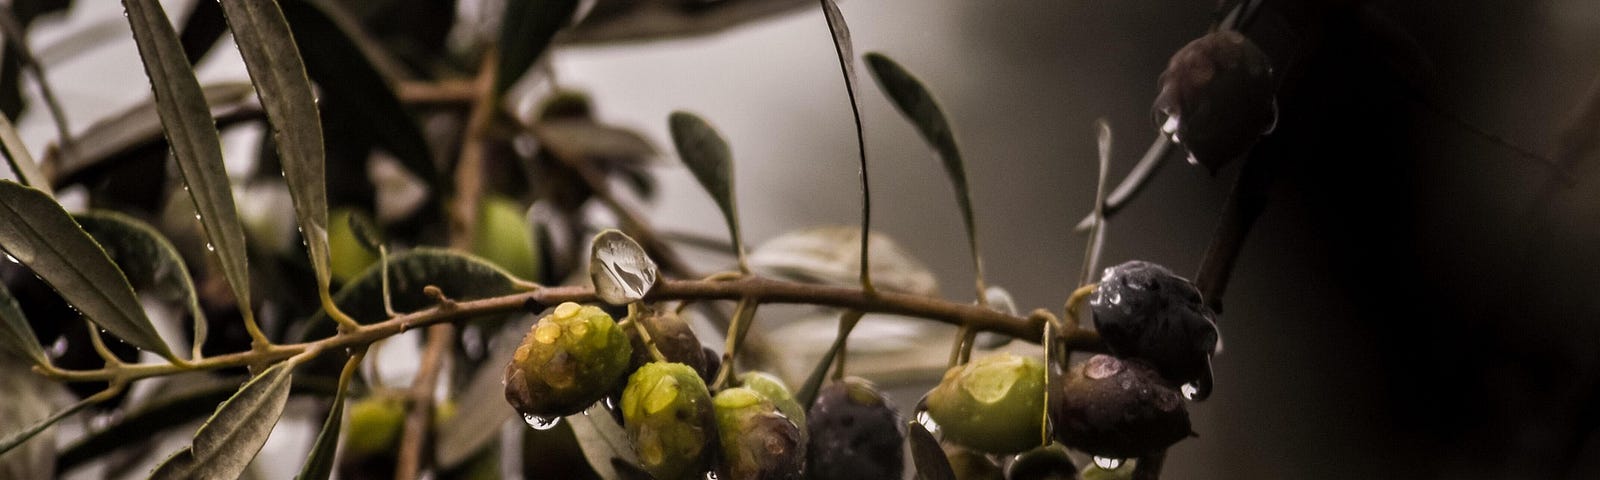 An olive tree with a few ripe and green olives after the rain.